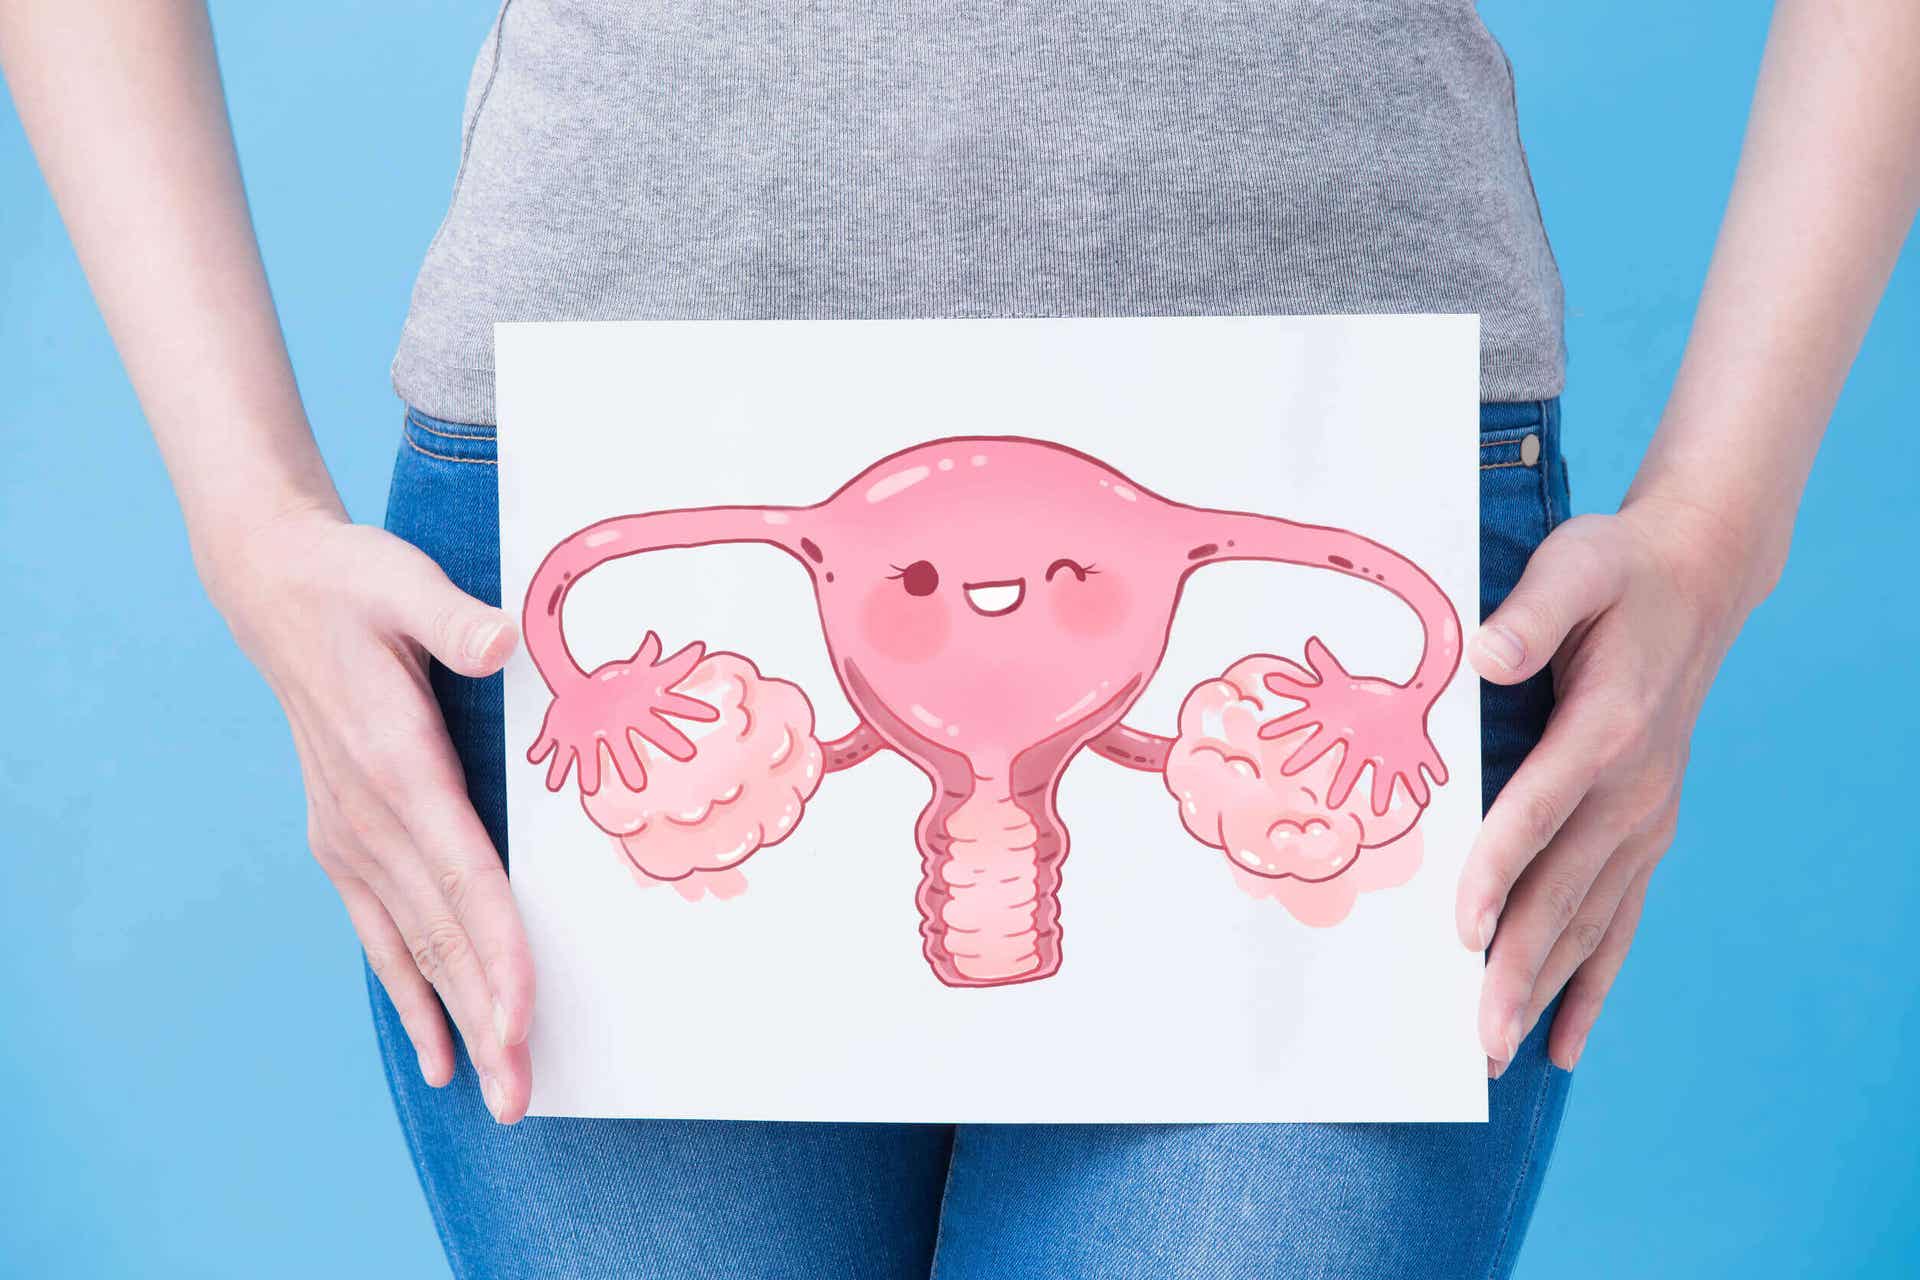 A woman holding a cartoon image of the female reproductive organs over her lower abdomen.